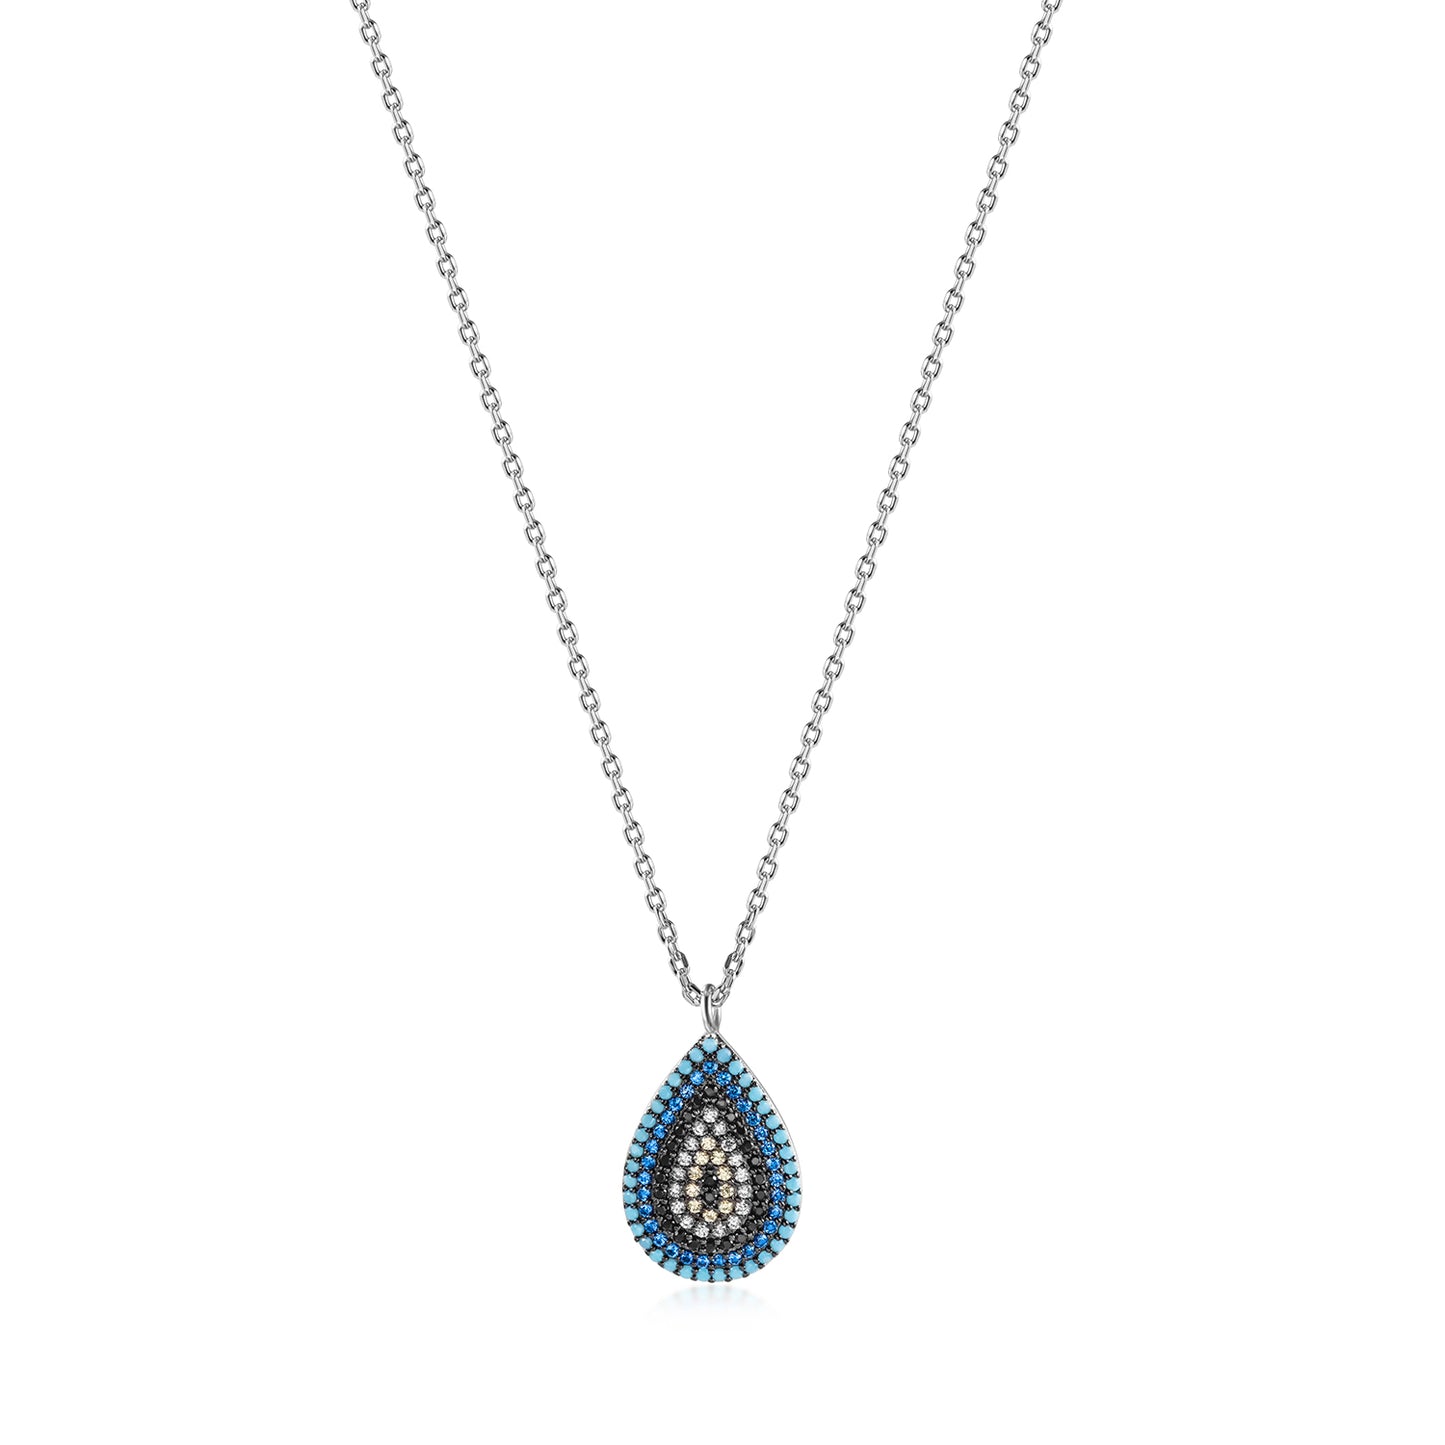 Load image into Gallery viewer, STERLING SILVER OVAL EVIL EYE CHARM PENDANT NECKLACE
